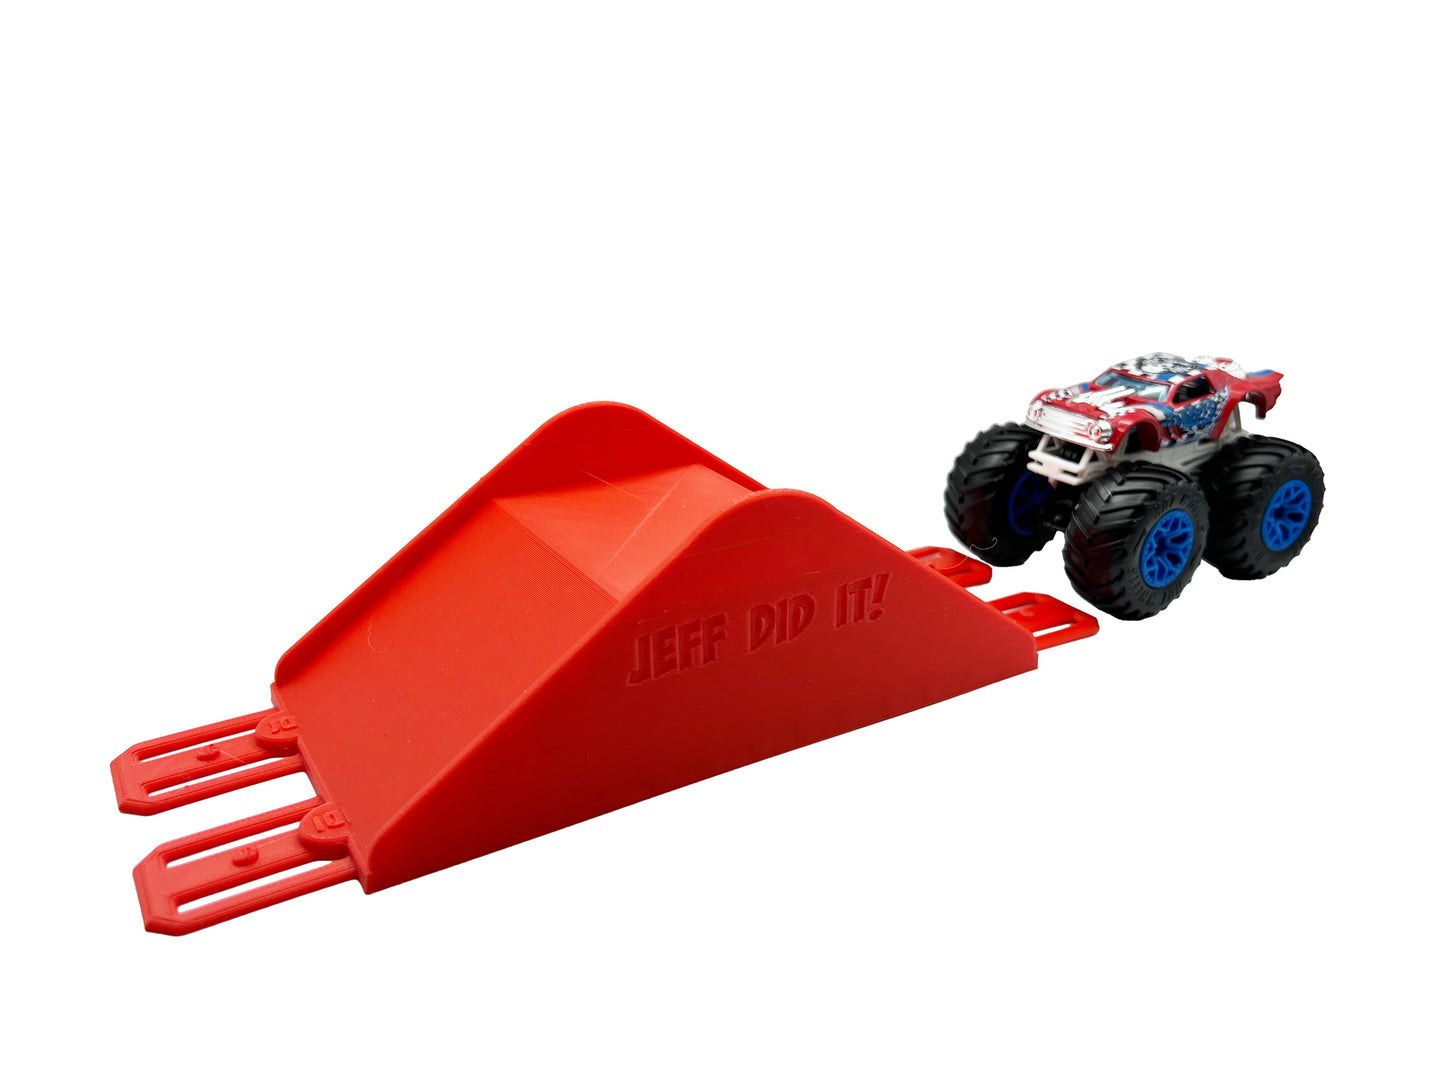 Jeff Did It! - Hot Wheels Monster Truck - 2 Lane Table Top Jump - 3D Printed - Designed and Made in the USA - Free Shipping